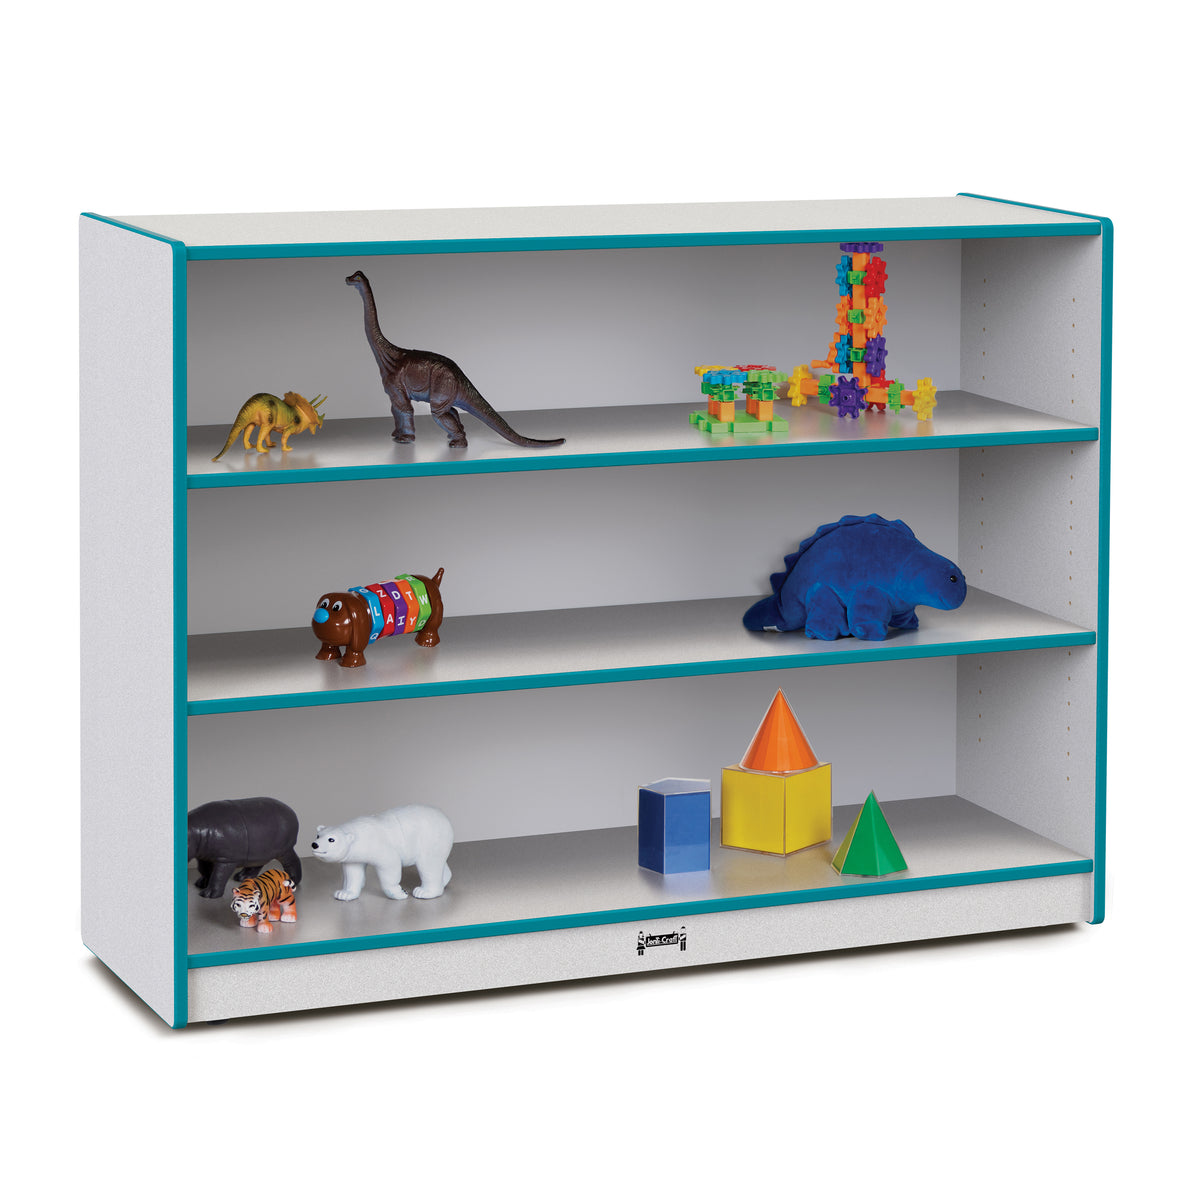 26932JCWW005, Rainbow Accents Super-Sized Adjustable Mobile Straight-Shelf - Teal